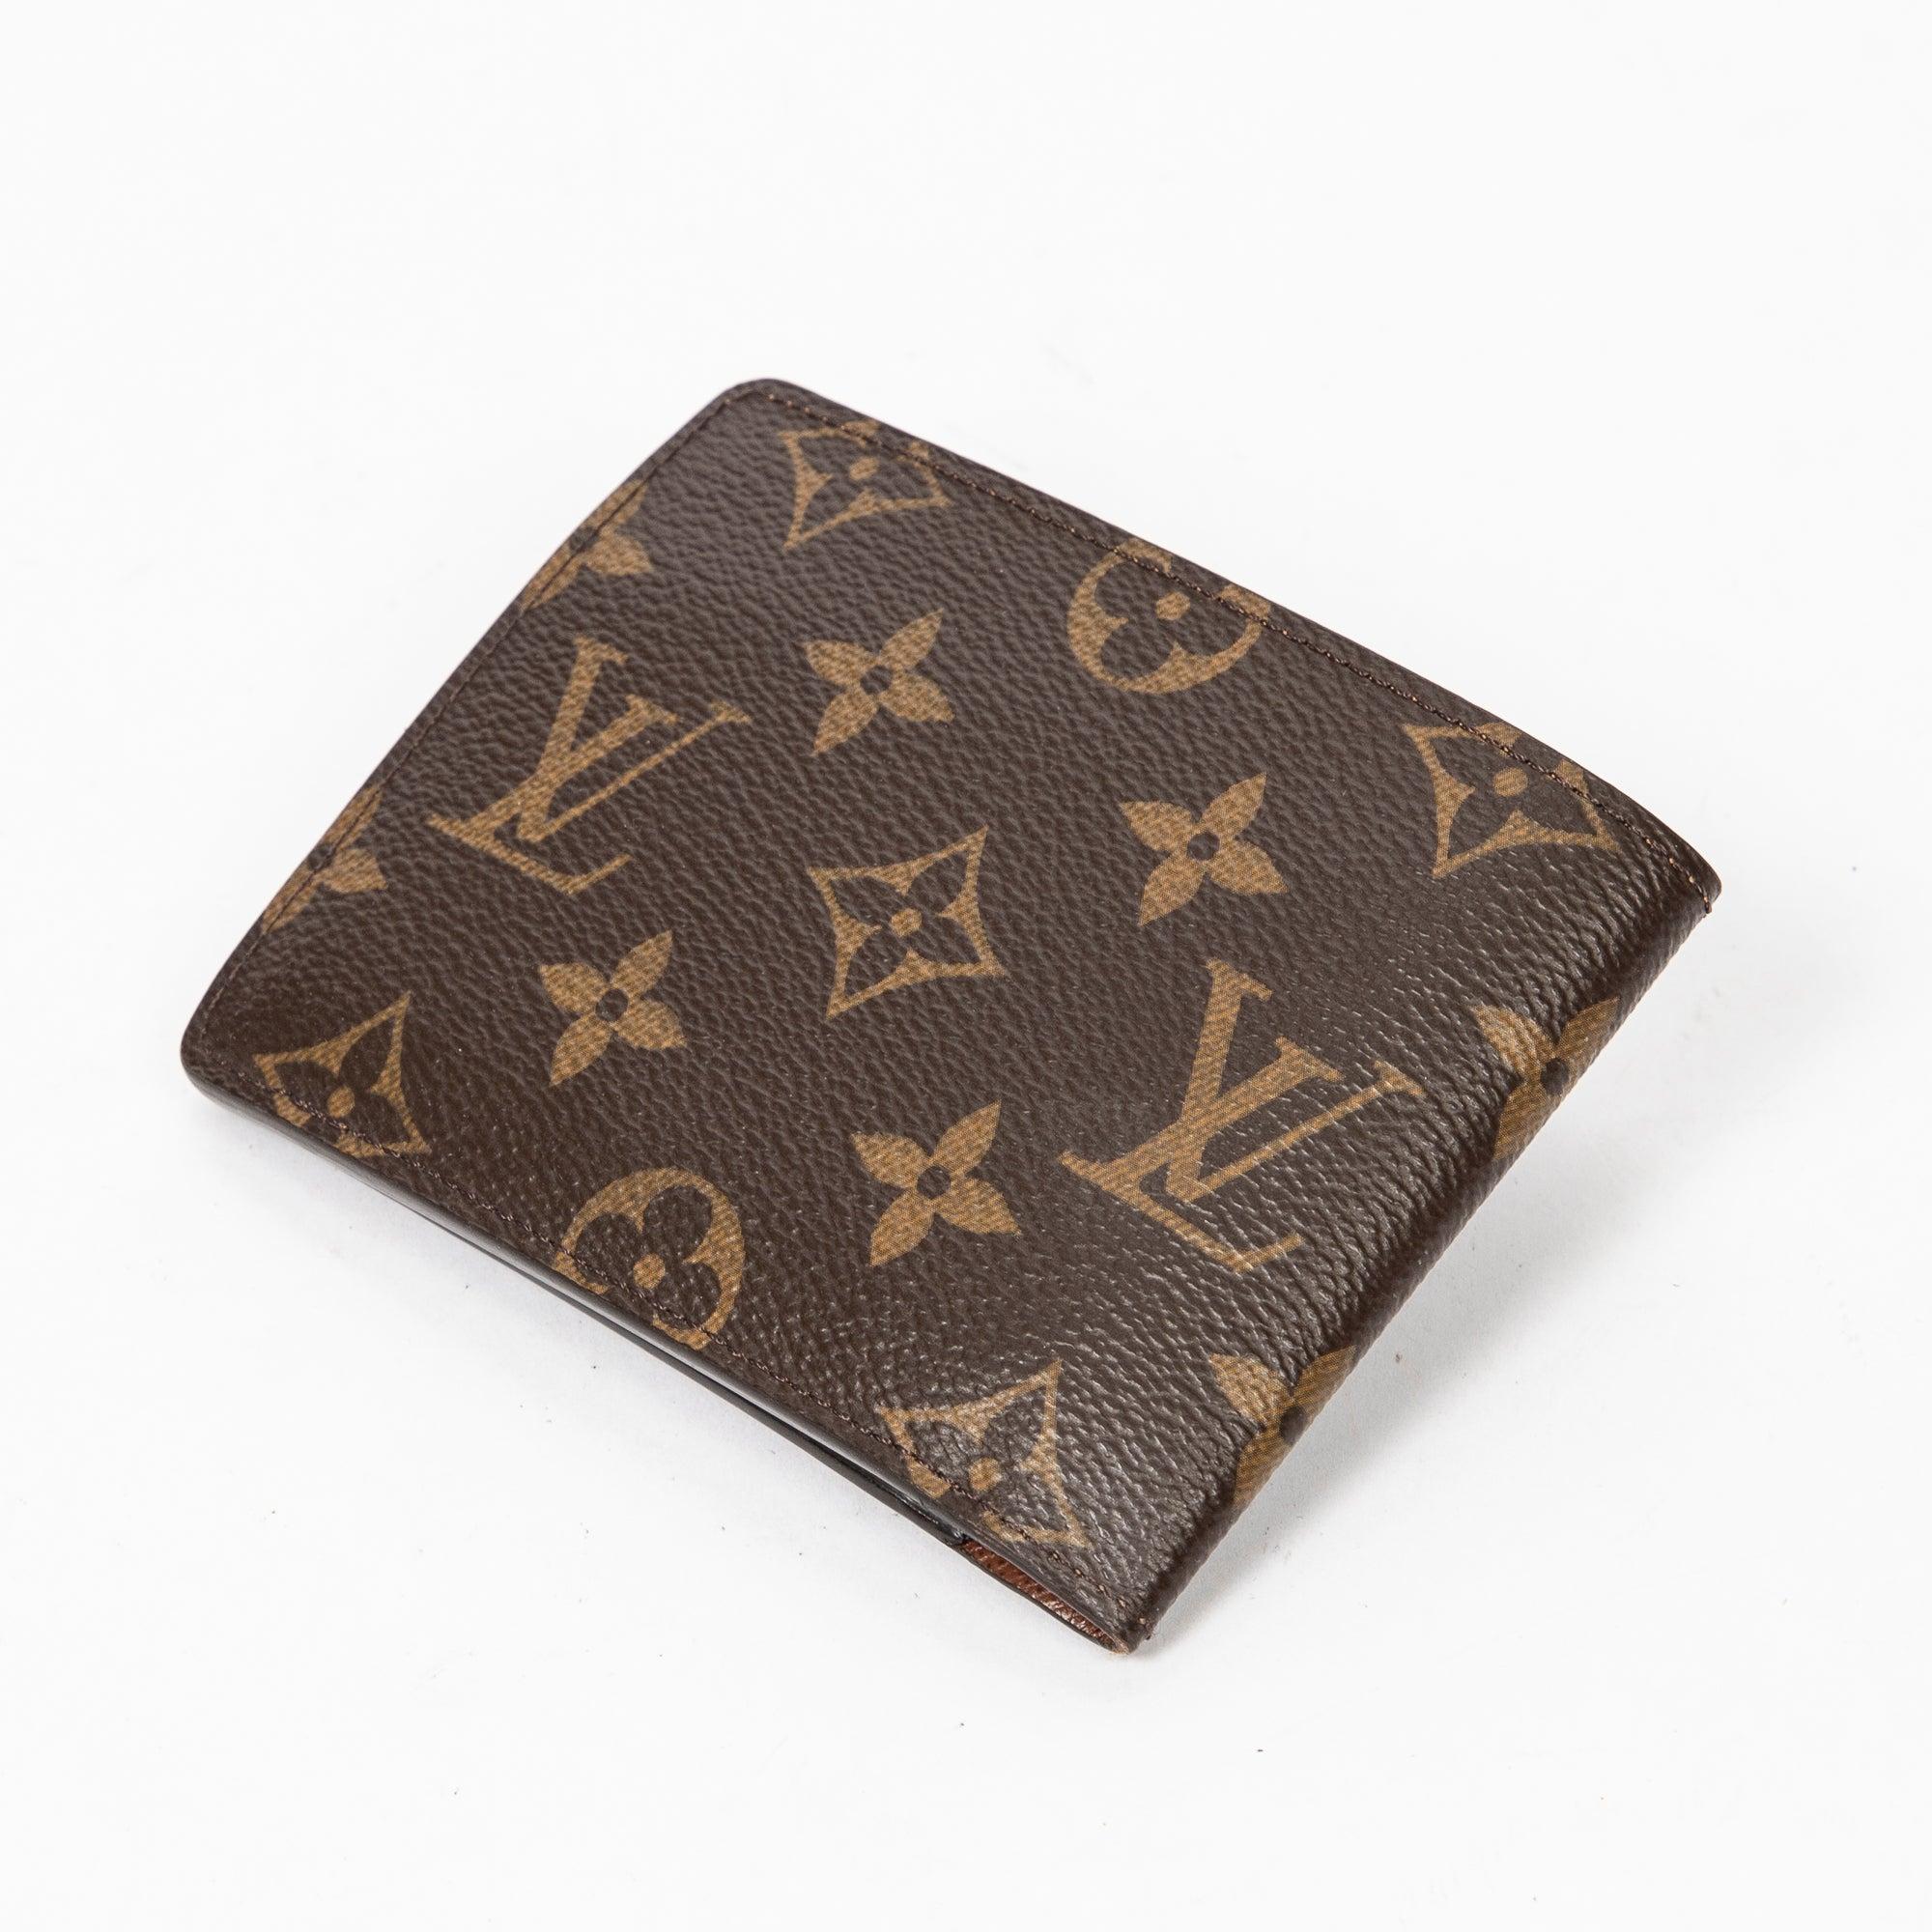 Louis Vuitton Portefeuille Multiple in Brown